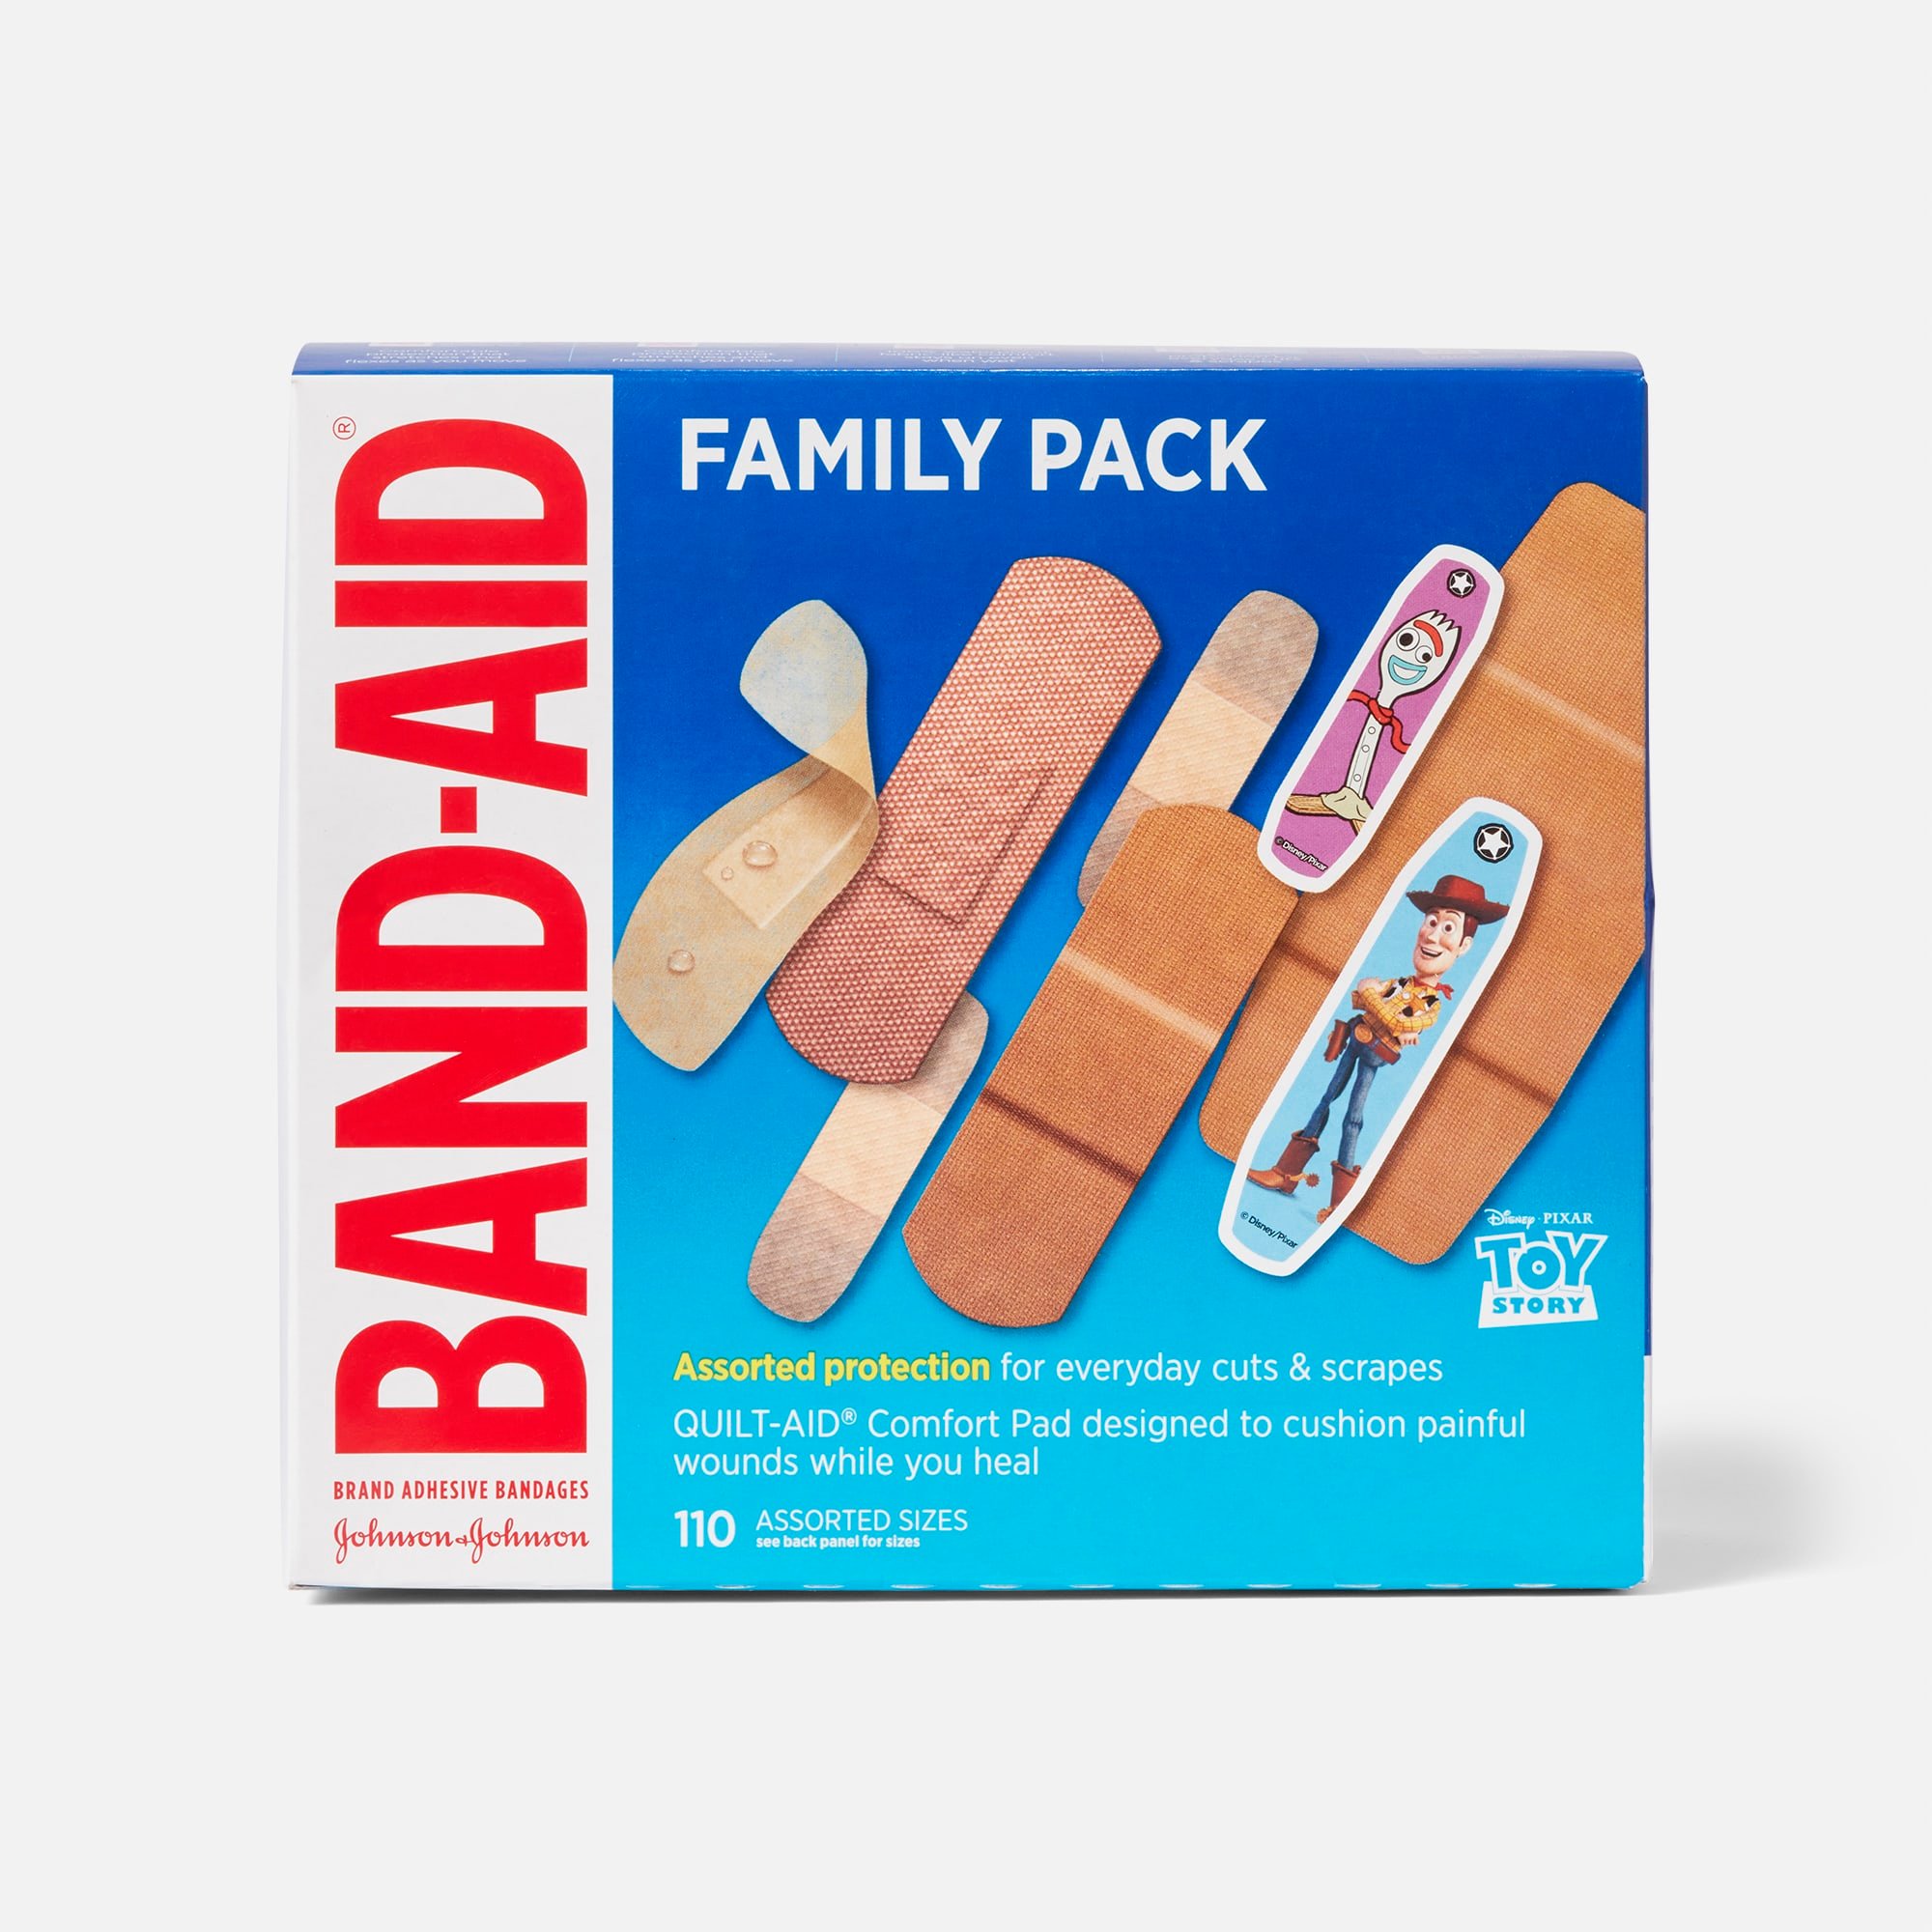 https://hsastore.com/on/demandware.static/-/Sites-hec-master/default/dw503b0ee9/images/large/band-aid-family-pack-adhesive-bandages-110ct-30842-1.jpg